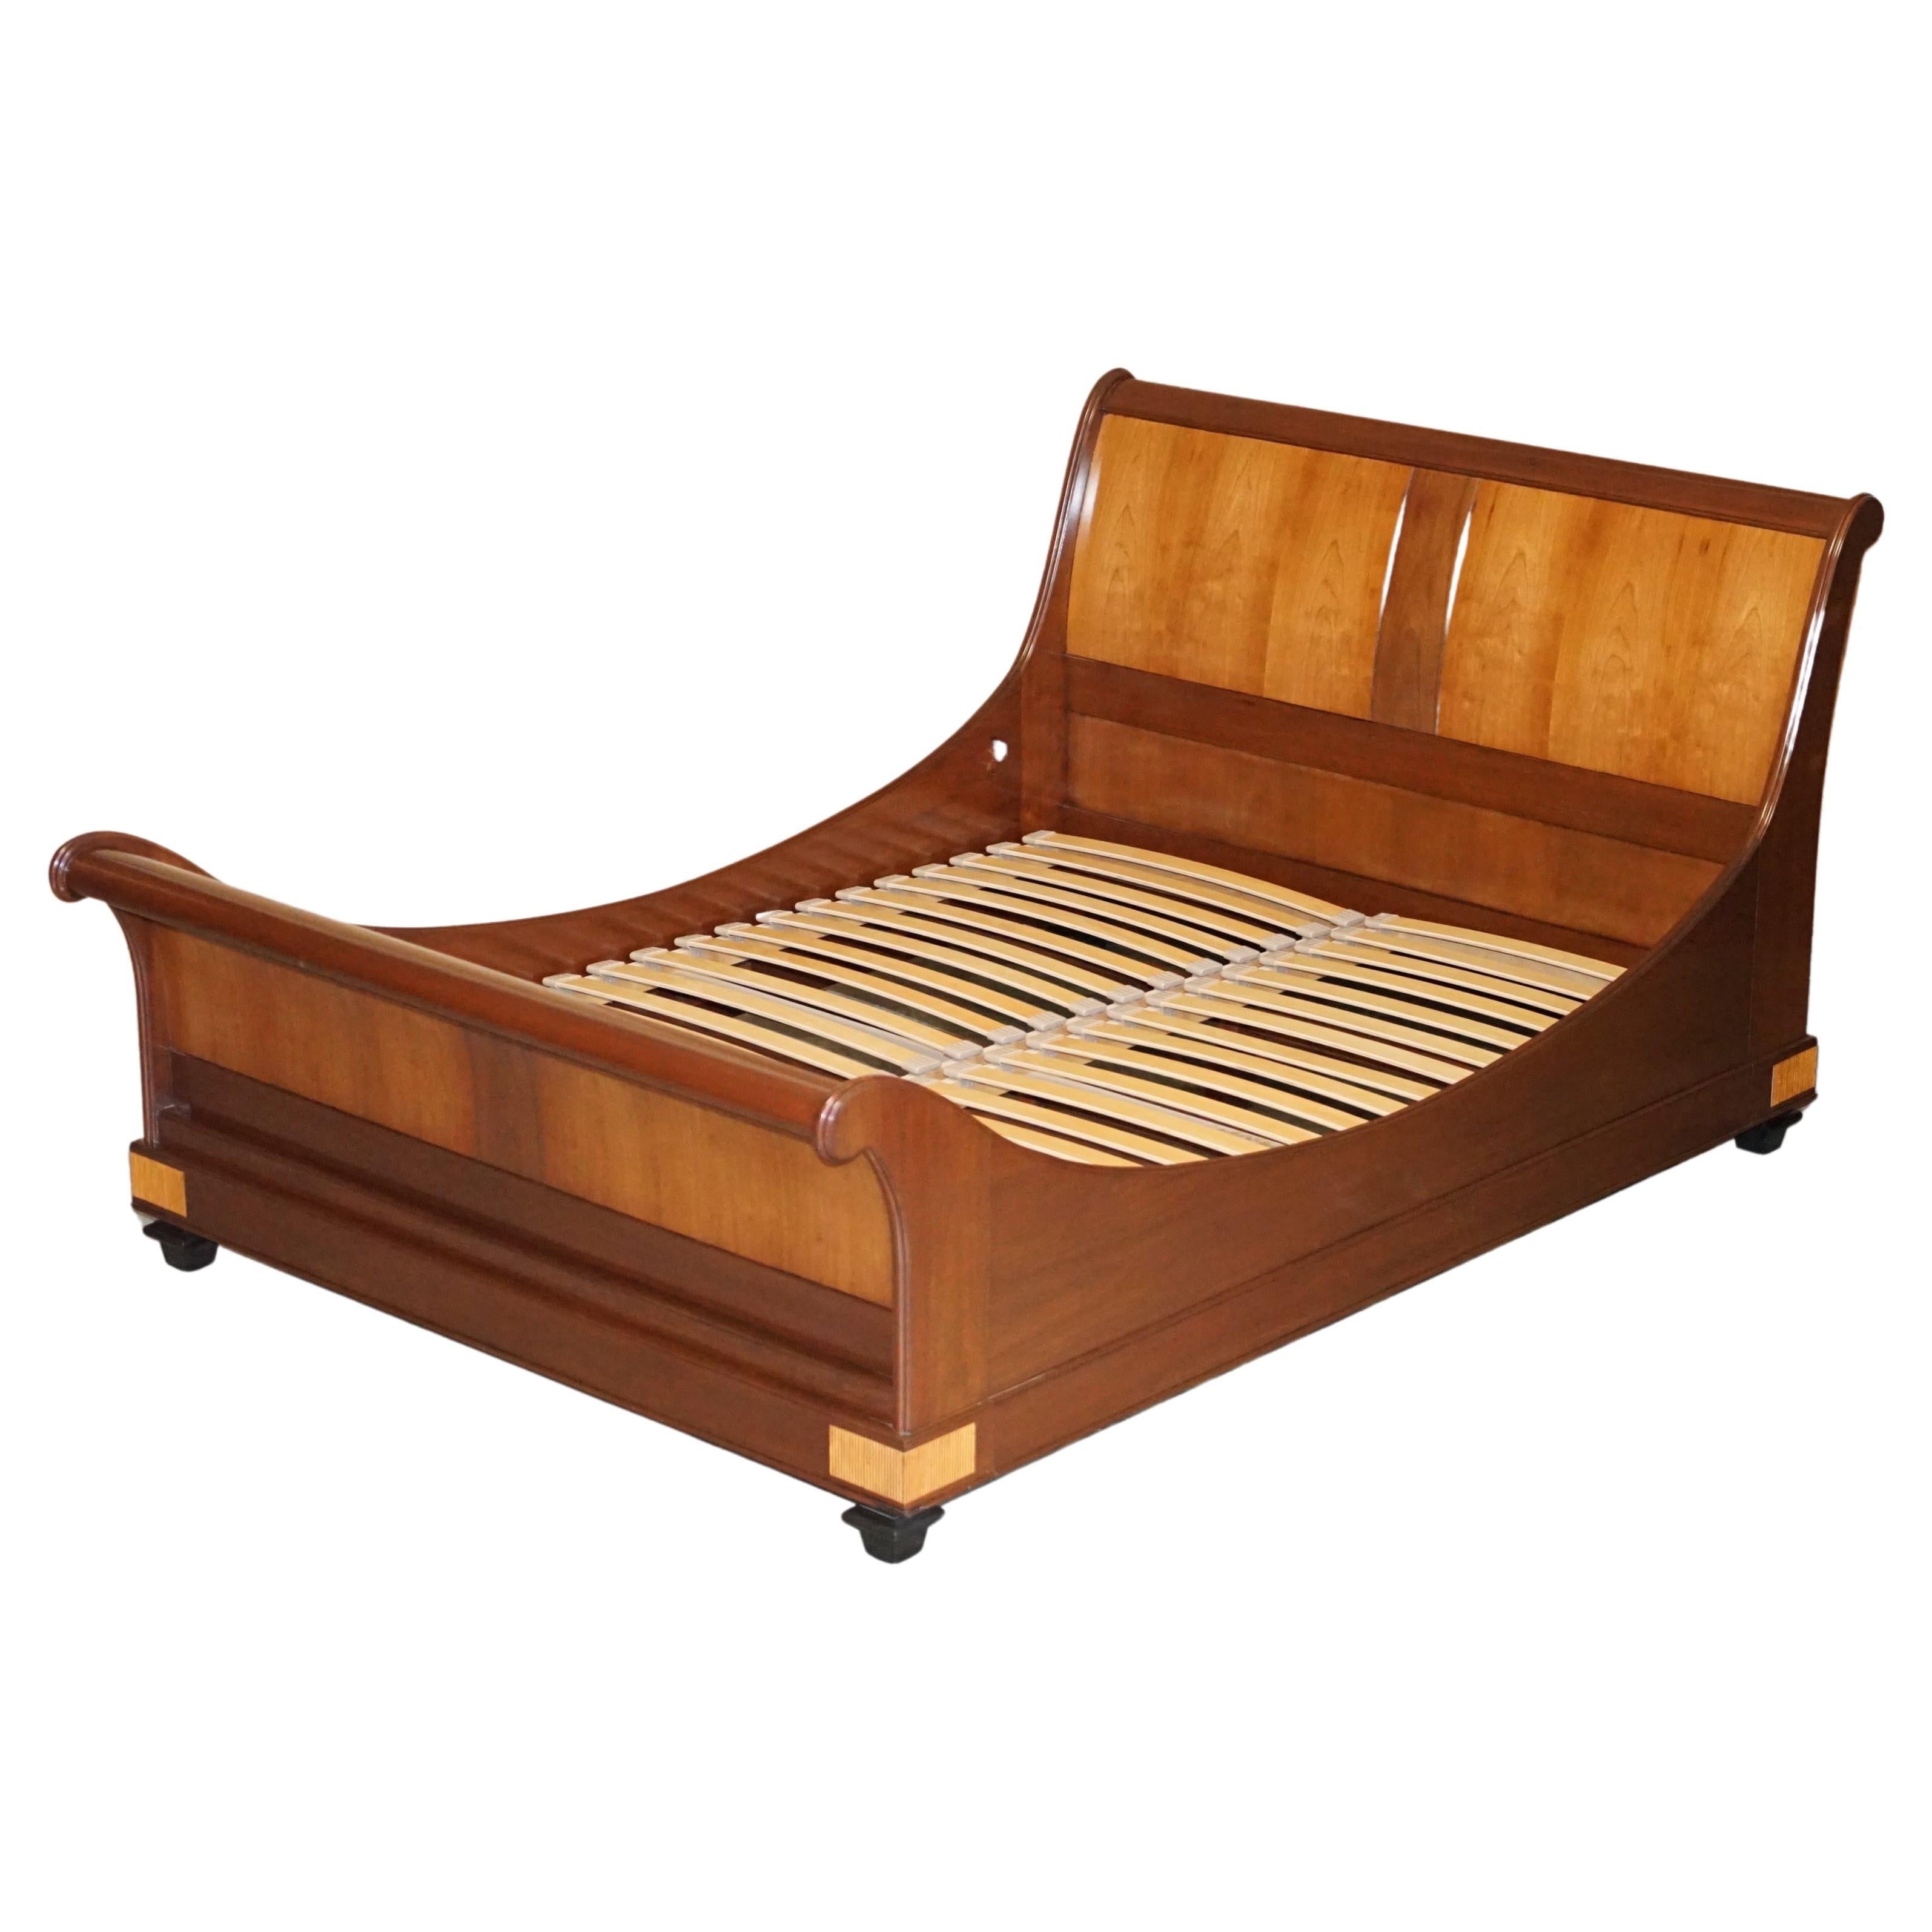 Bed Palais Sleigh King Size, King Sleigh Bed Frame Cherry